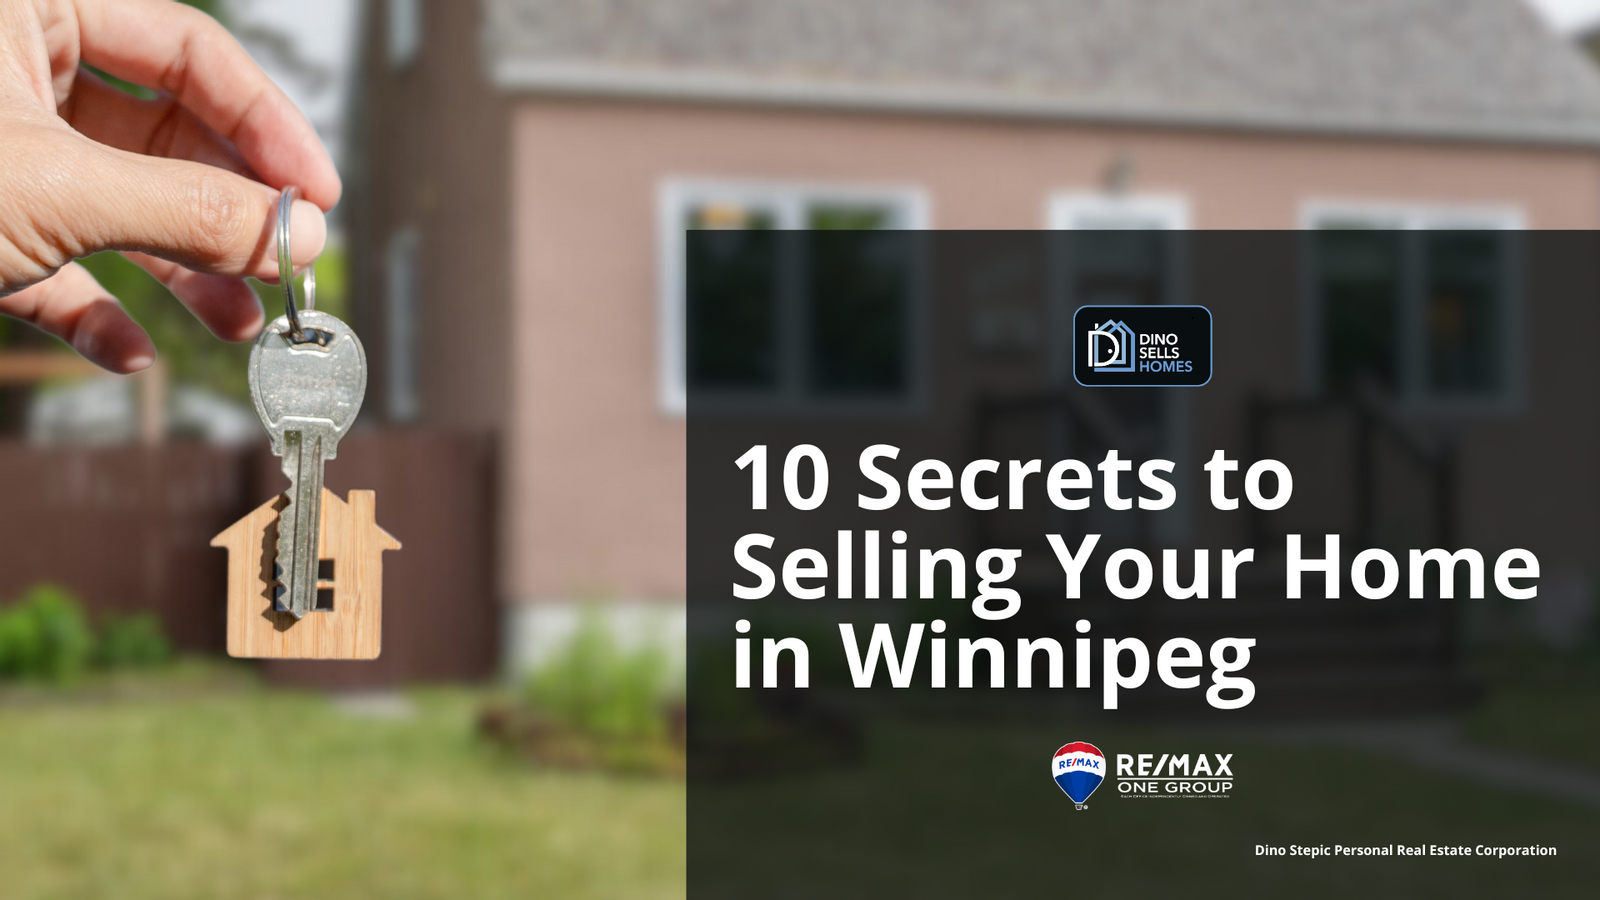 10 Secrets to Selling Your Home in Winnipeg